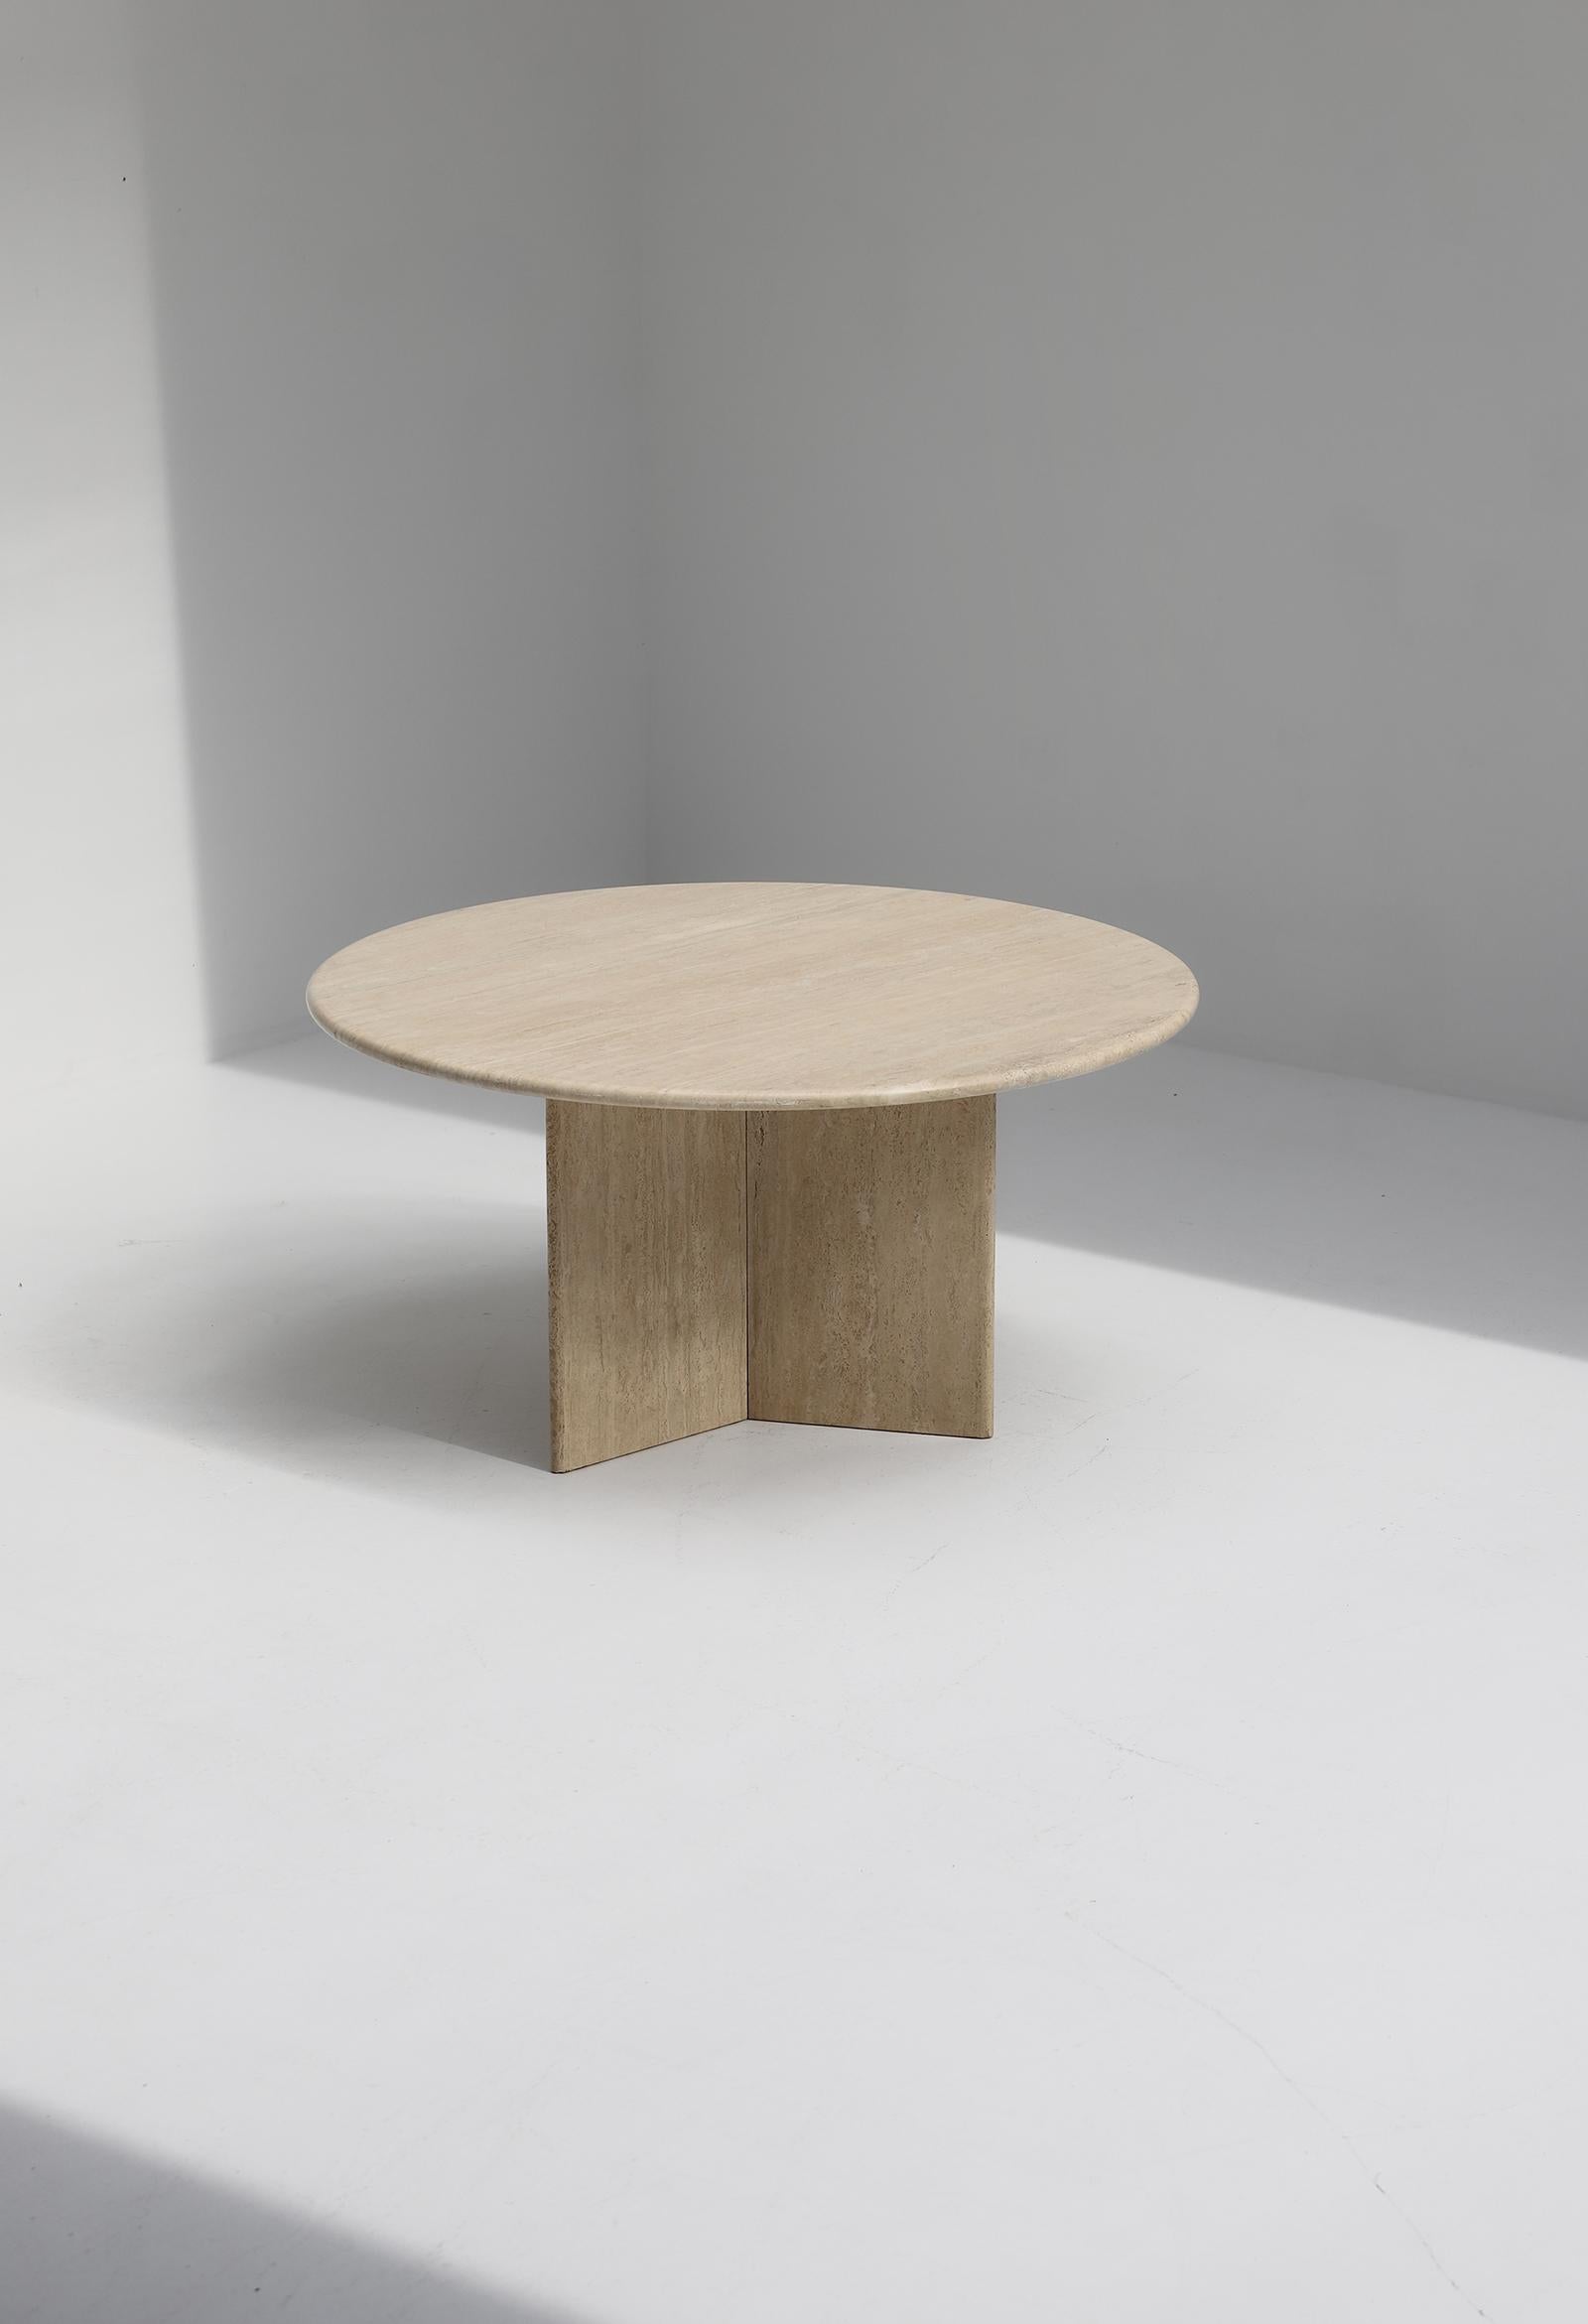 European Decorative Travertine Dining Table Designed in the 1970s